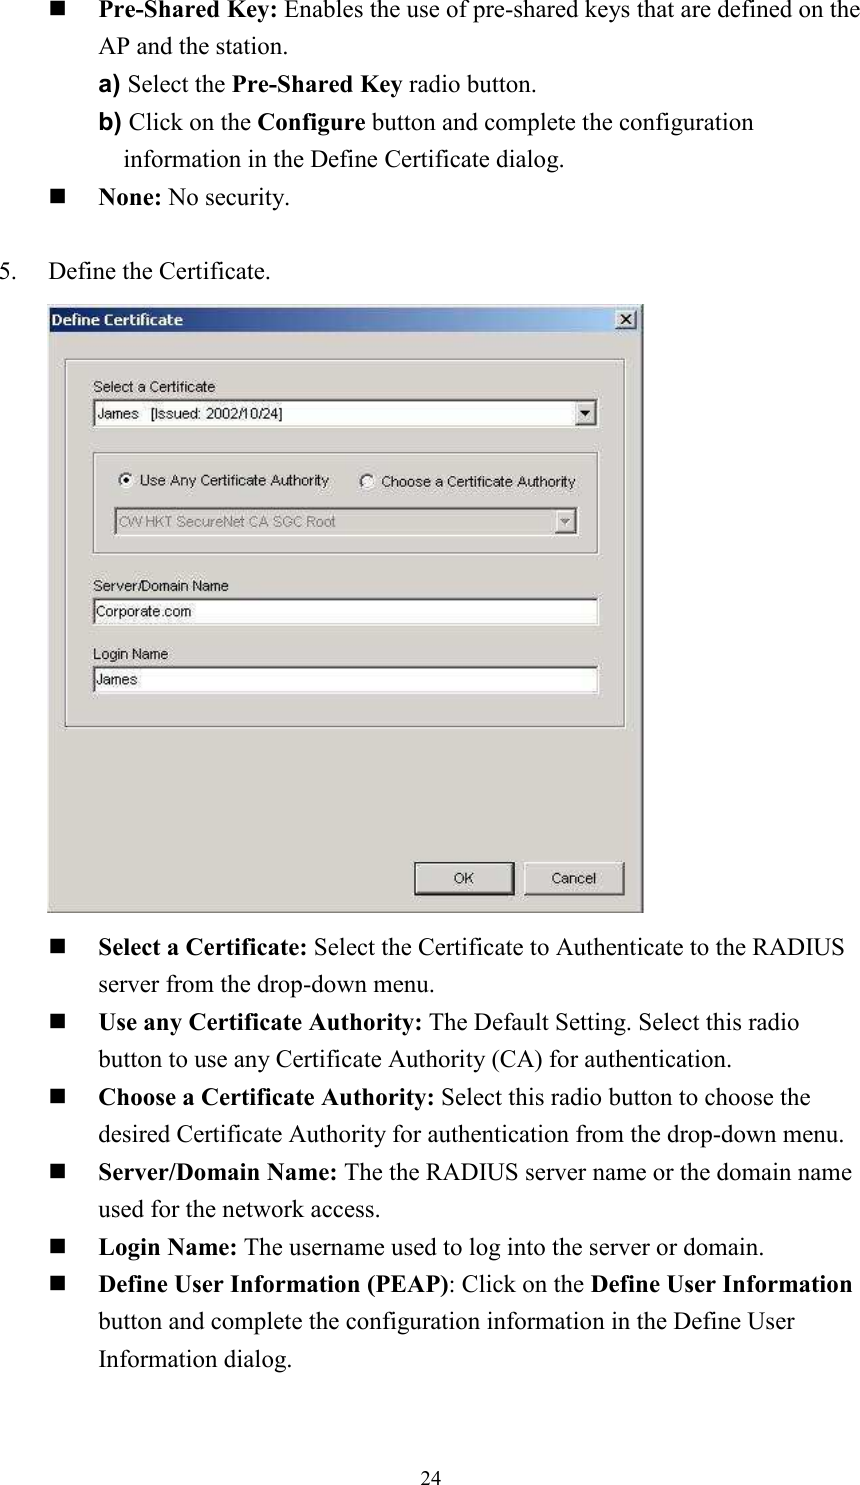 24Pre-Shared Key: Enables the use of pre-shared keys that are defined on the AP and the station. a) Select the Pre-Shared Key radio button. b) Click on the Configure button and complete the configuration information in the Define Certificate dialog. None: No security. 5.    Define the Certificate.        Select a Certificate: Select the Certificate to Authenticate to the RADIUS server from the drop-down menu. Use any Certificate Authority: The Default Setting. Select this radio button to use any Certificate Authority (CA) for authentication. Choose a Certificate Authority: Select this radio button to choose the desired Certificate Authority for authentication from the drop-down menu. Server/Domain Name: The the RADIUS server name or the domain name used for the network access. Login Name: The username used to log into the server or domain.Define User Information (PEAP): Click on the Define User Information button and complete the configuration information in the Define User Information dialog. 